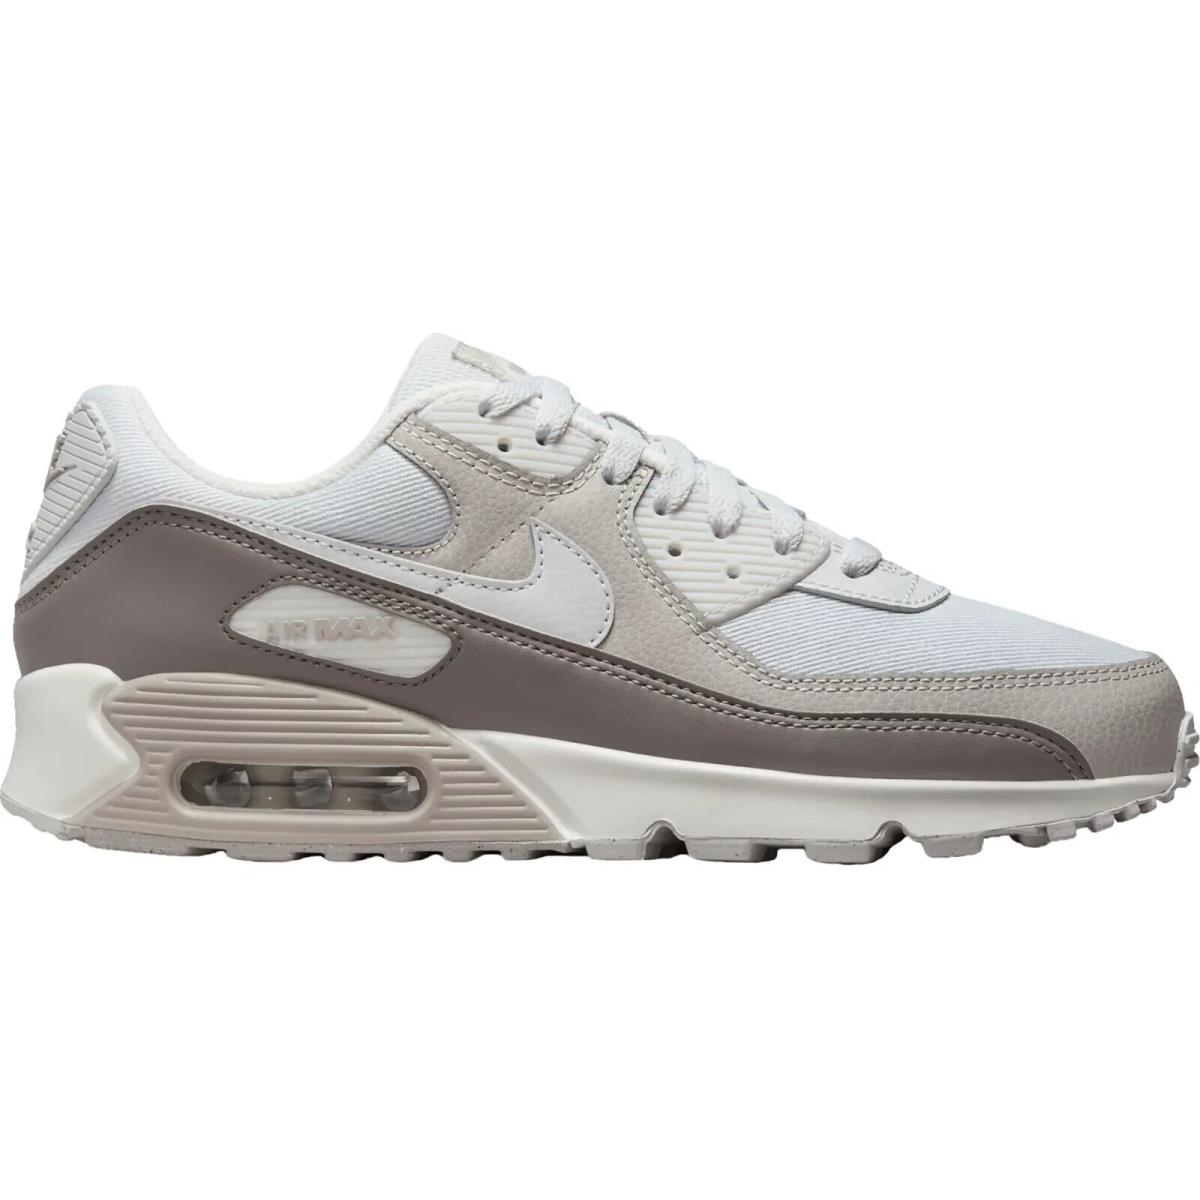 Nike Air Max 90 Men`s Casual Shoes All Colors US Sizes 7-14 Bestseller Photon Dust/Photon Dust/Light Iron Ore/Sail